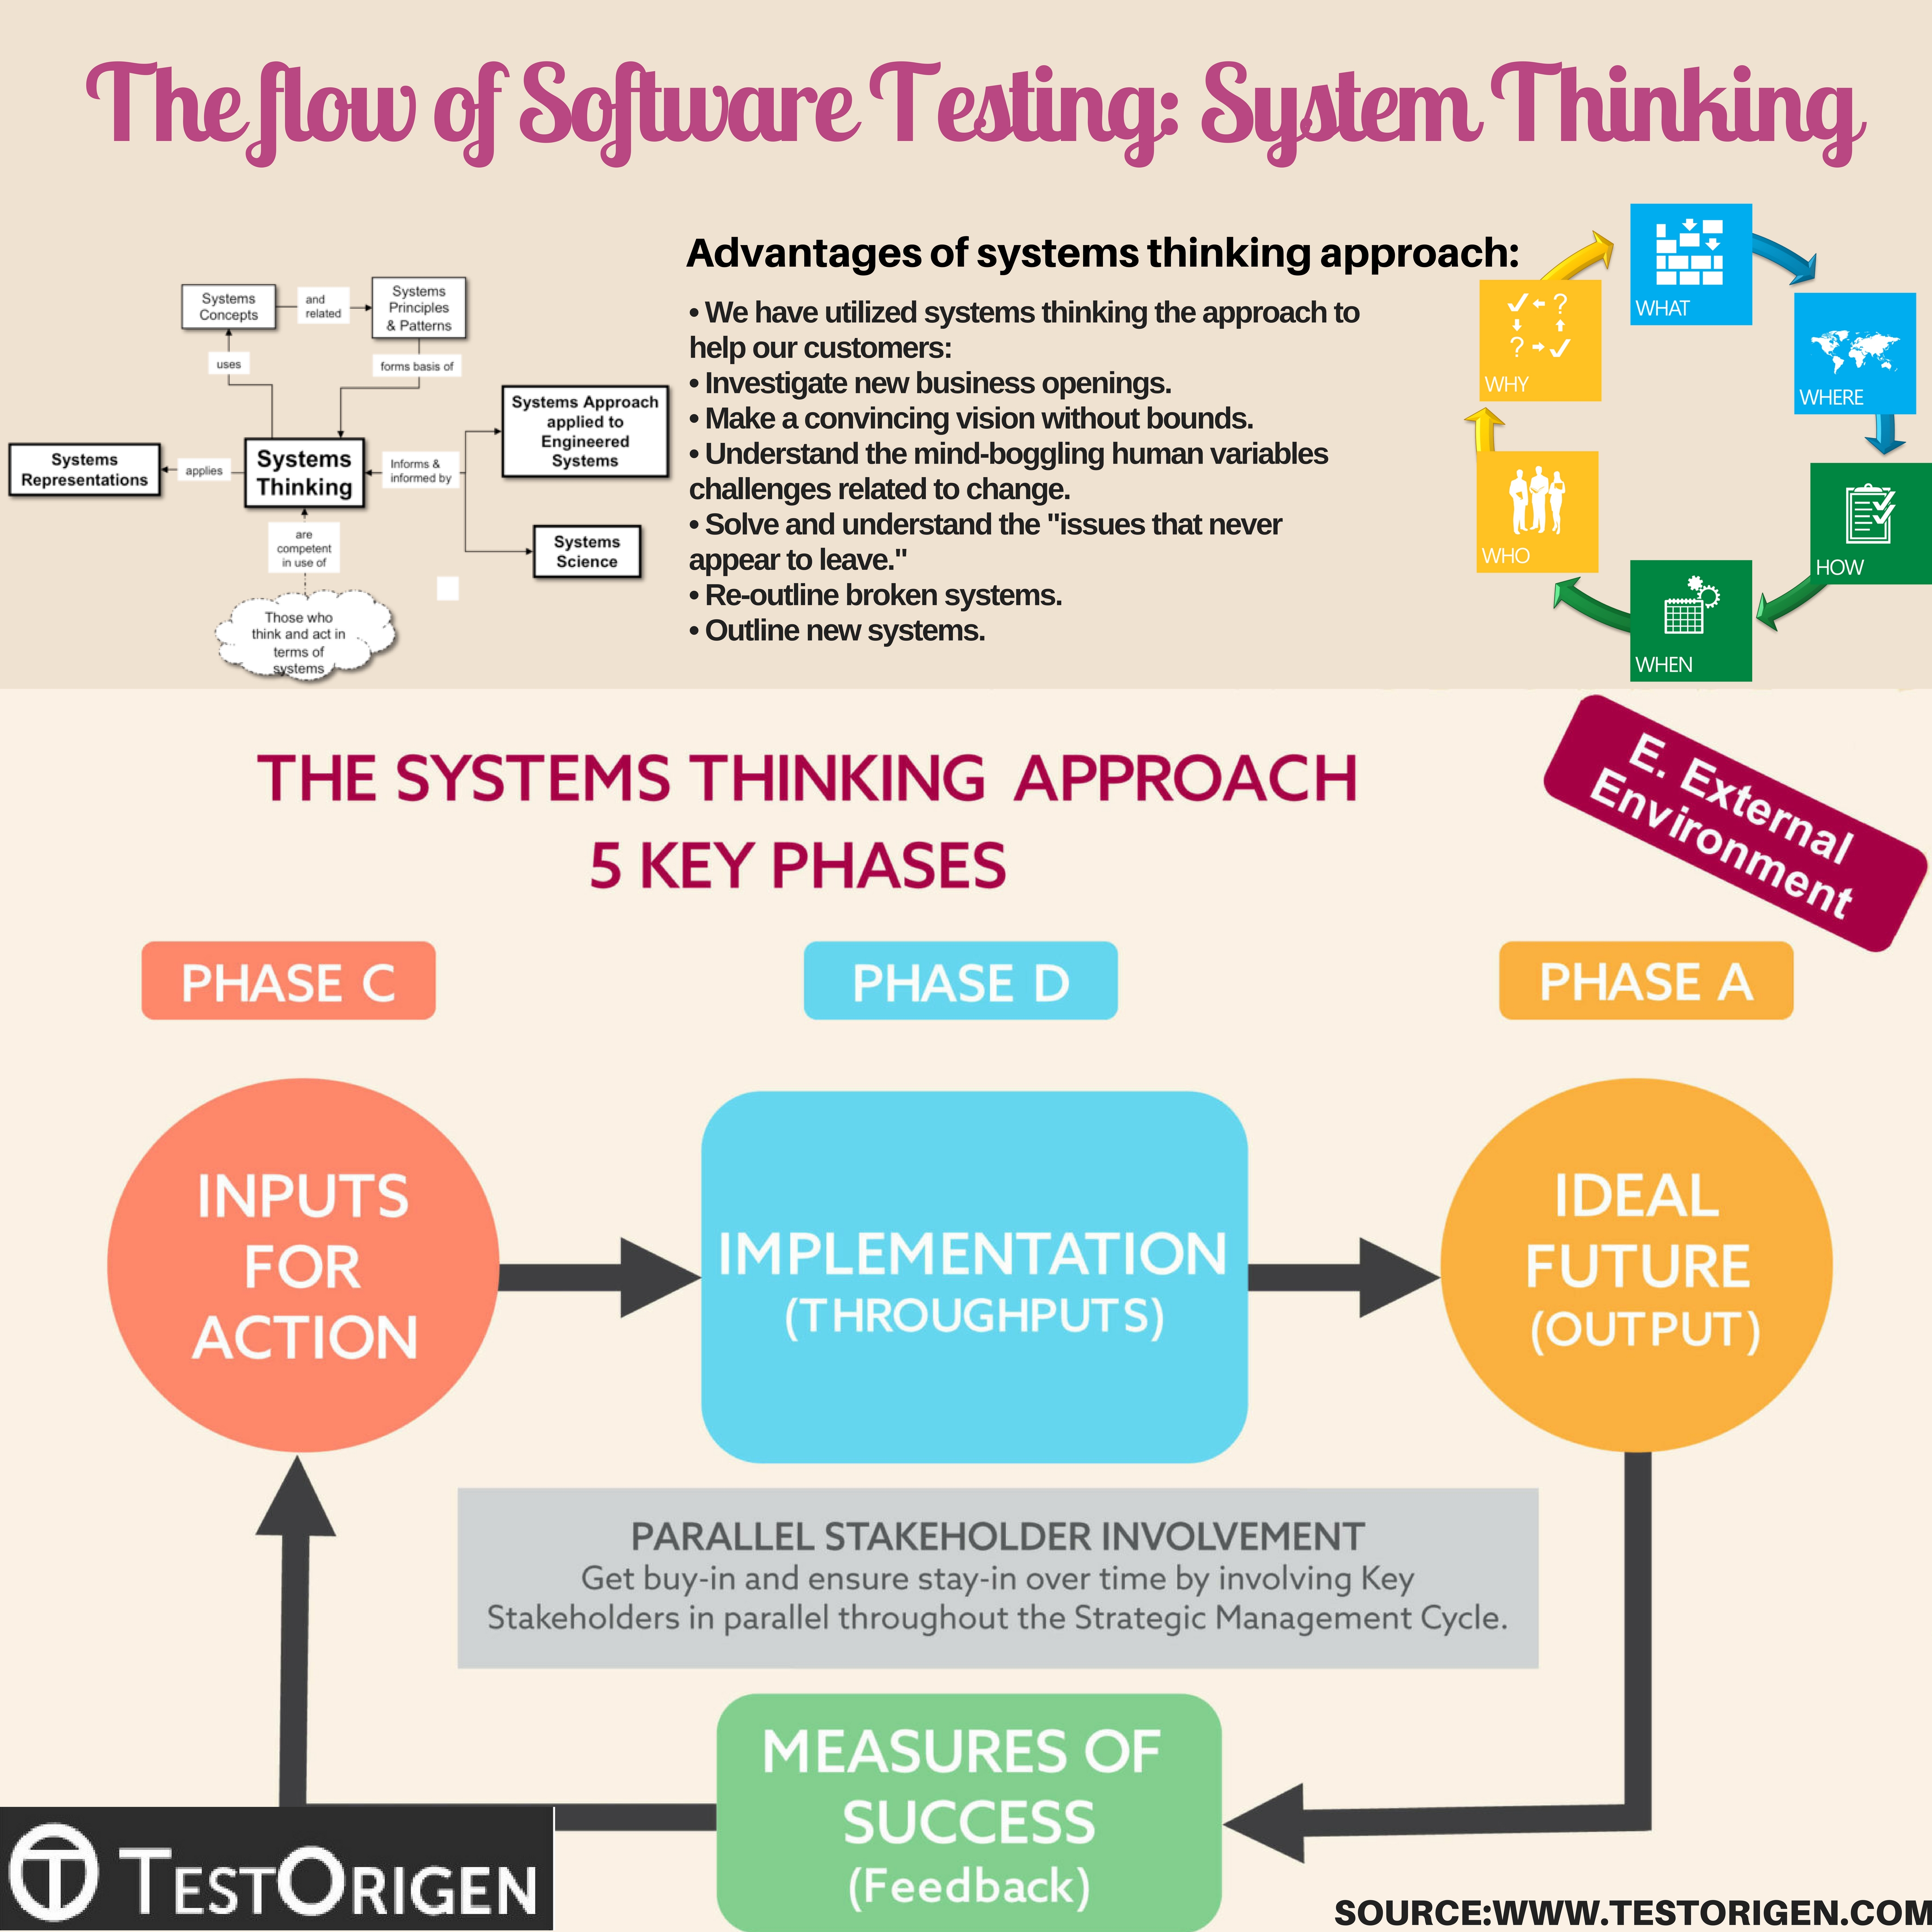 The flow of Software Testing: System Thinking